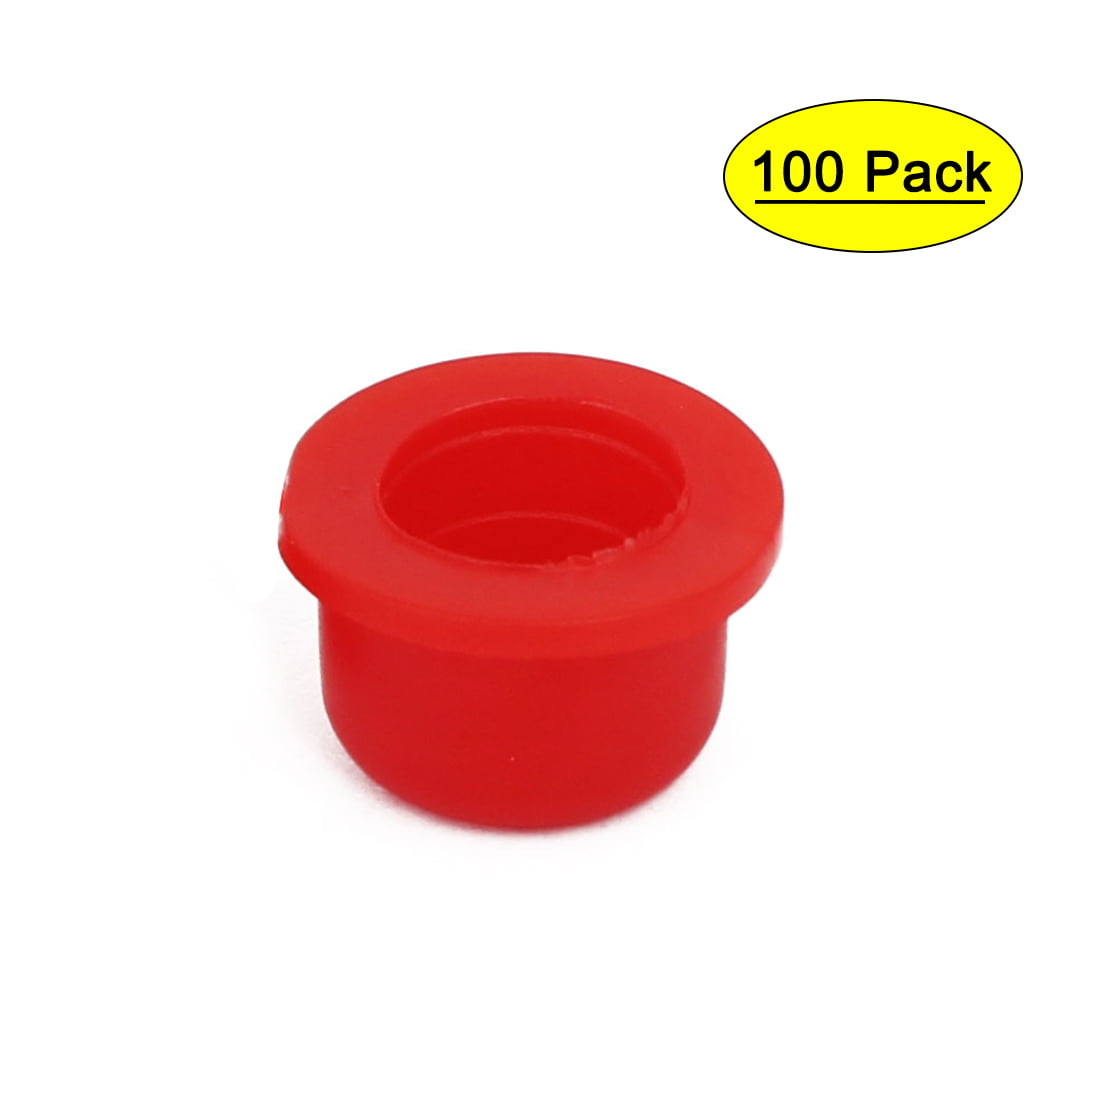 DR M12 Flange Mounted Tapered Caps Stoppers Tube End Insert Red 100pcs